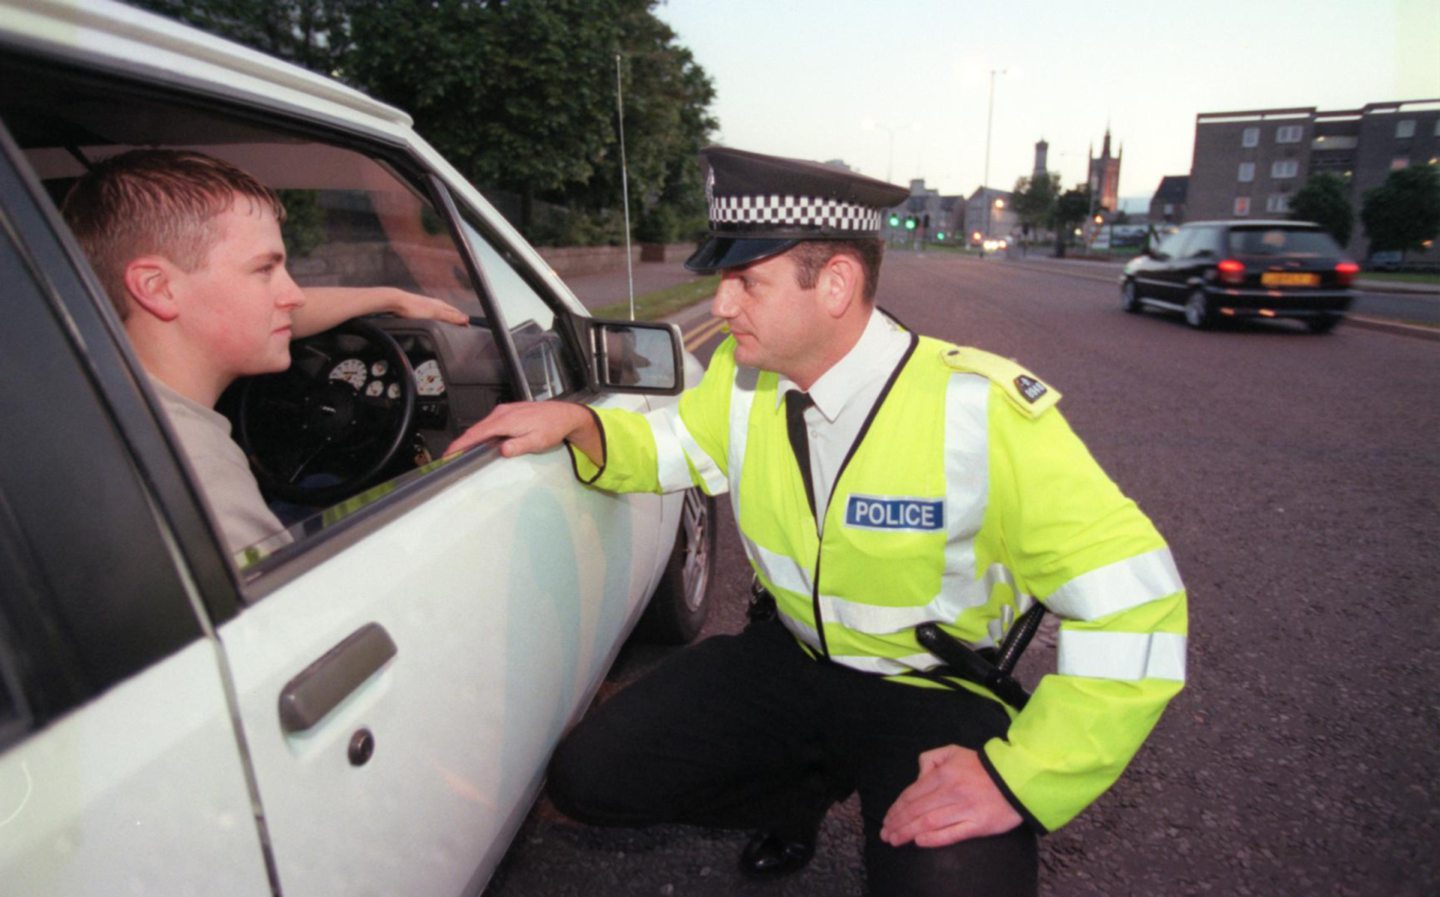 A policeman kneeling down to talk to a man in a car with his window down